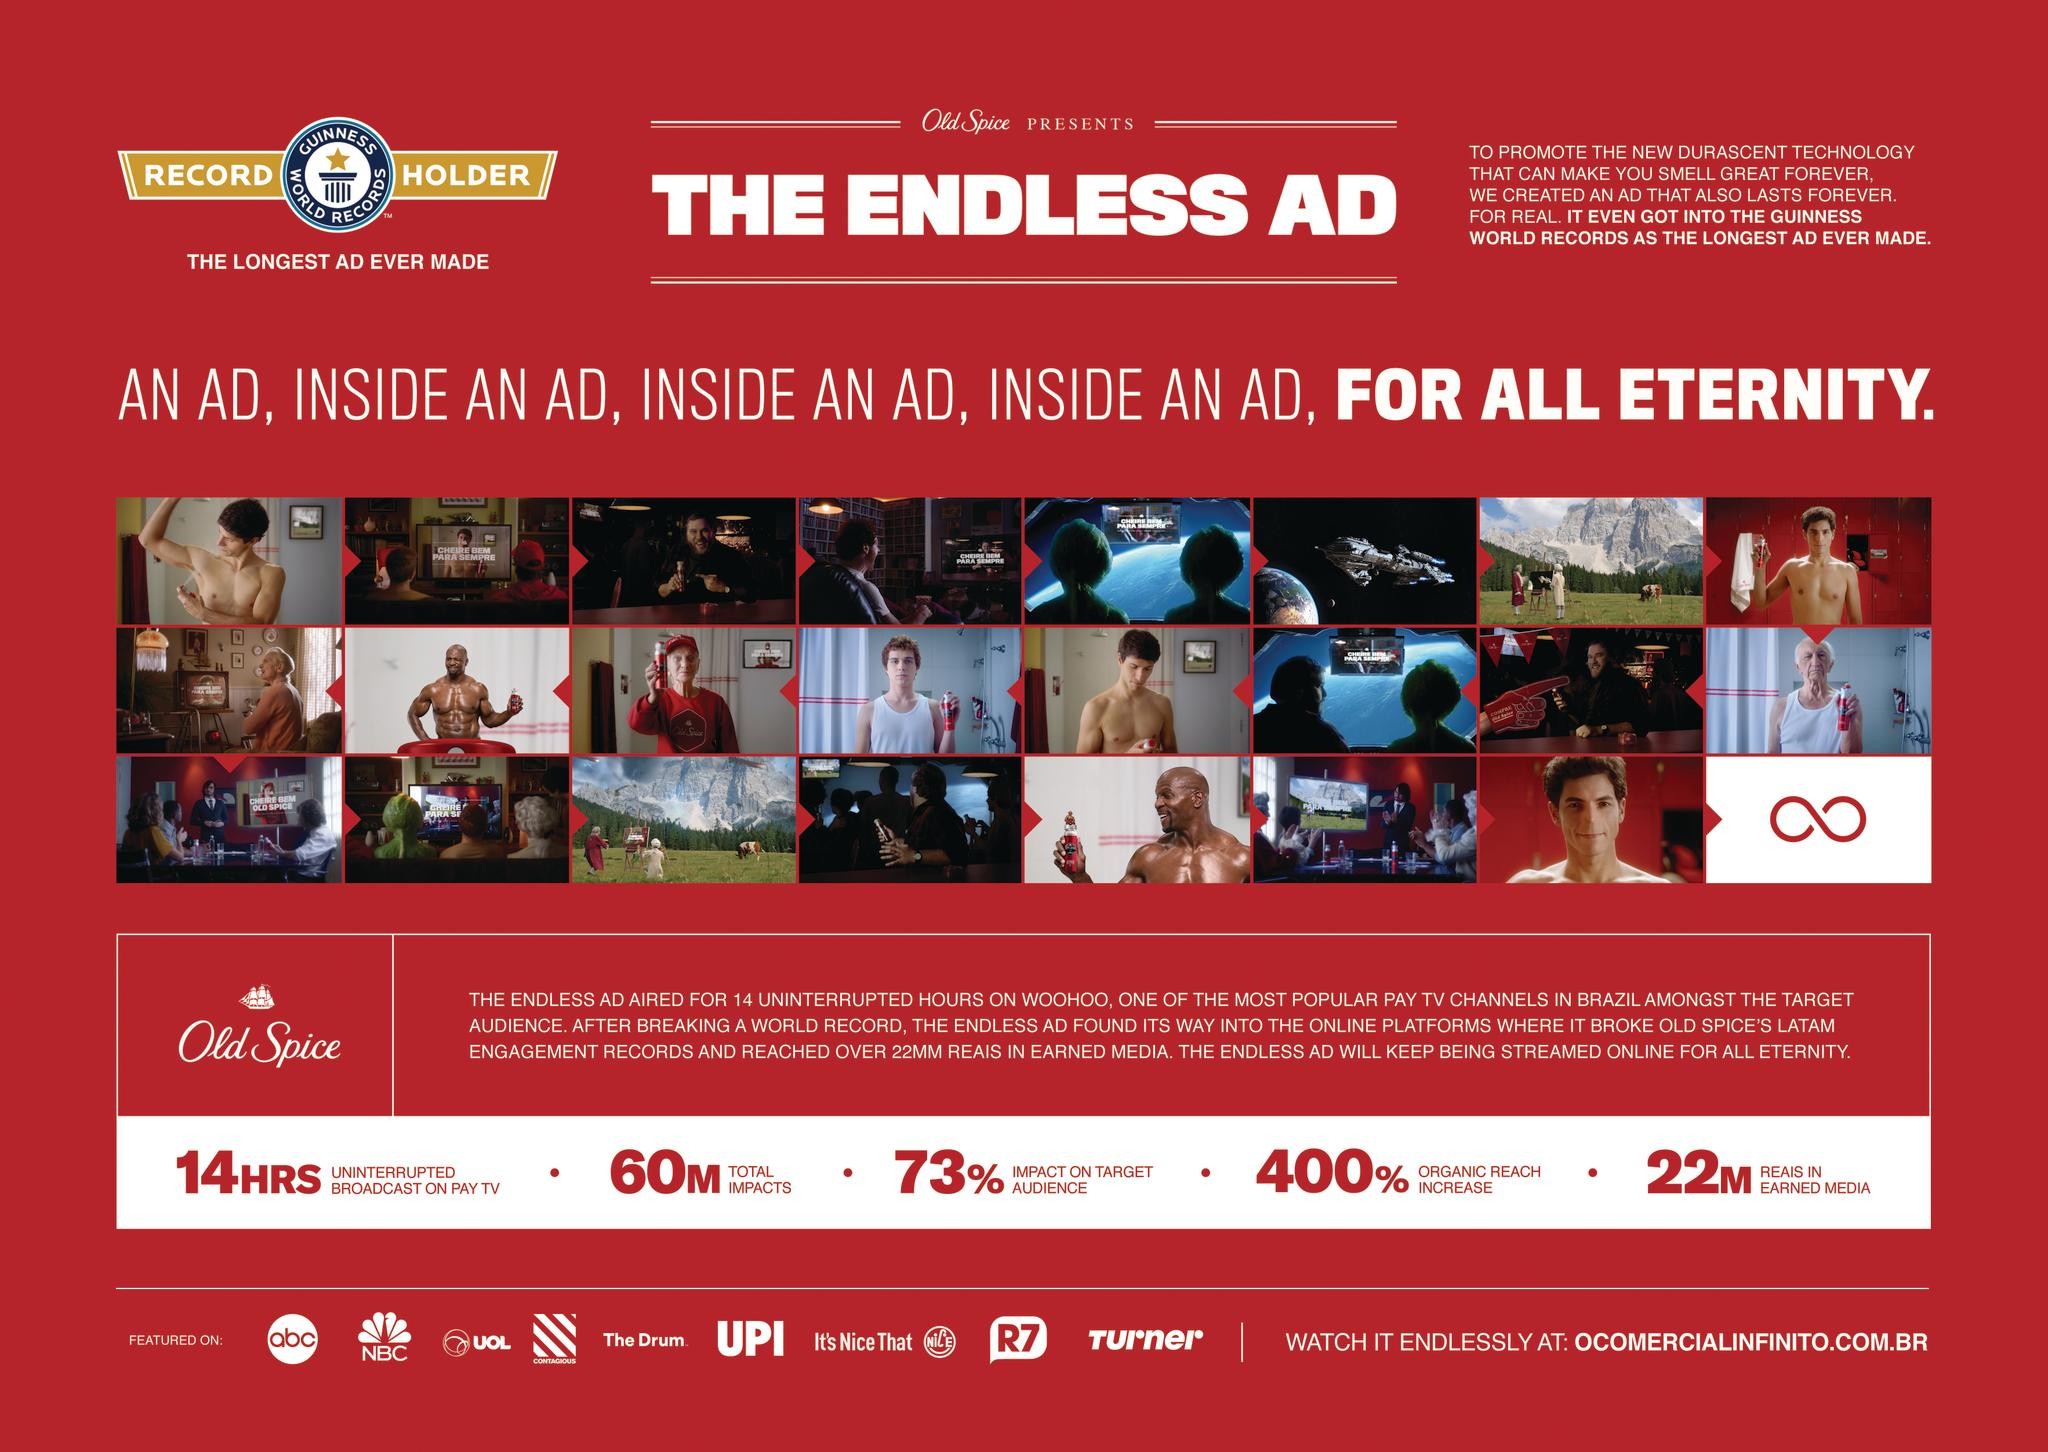 The Endless Ad